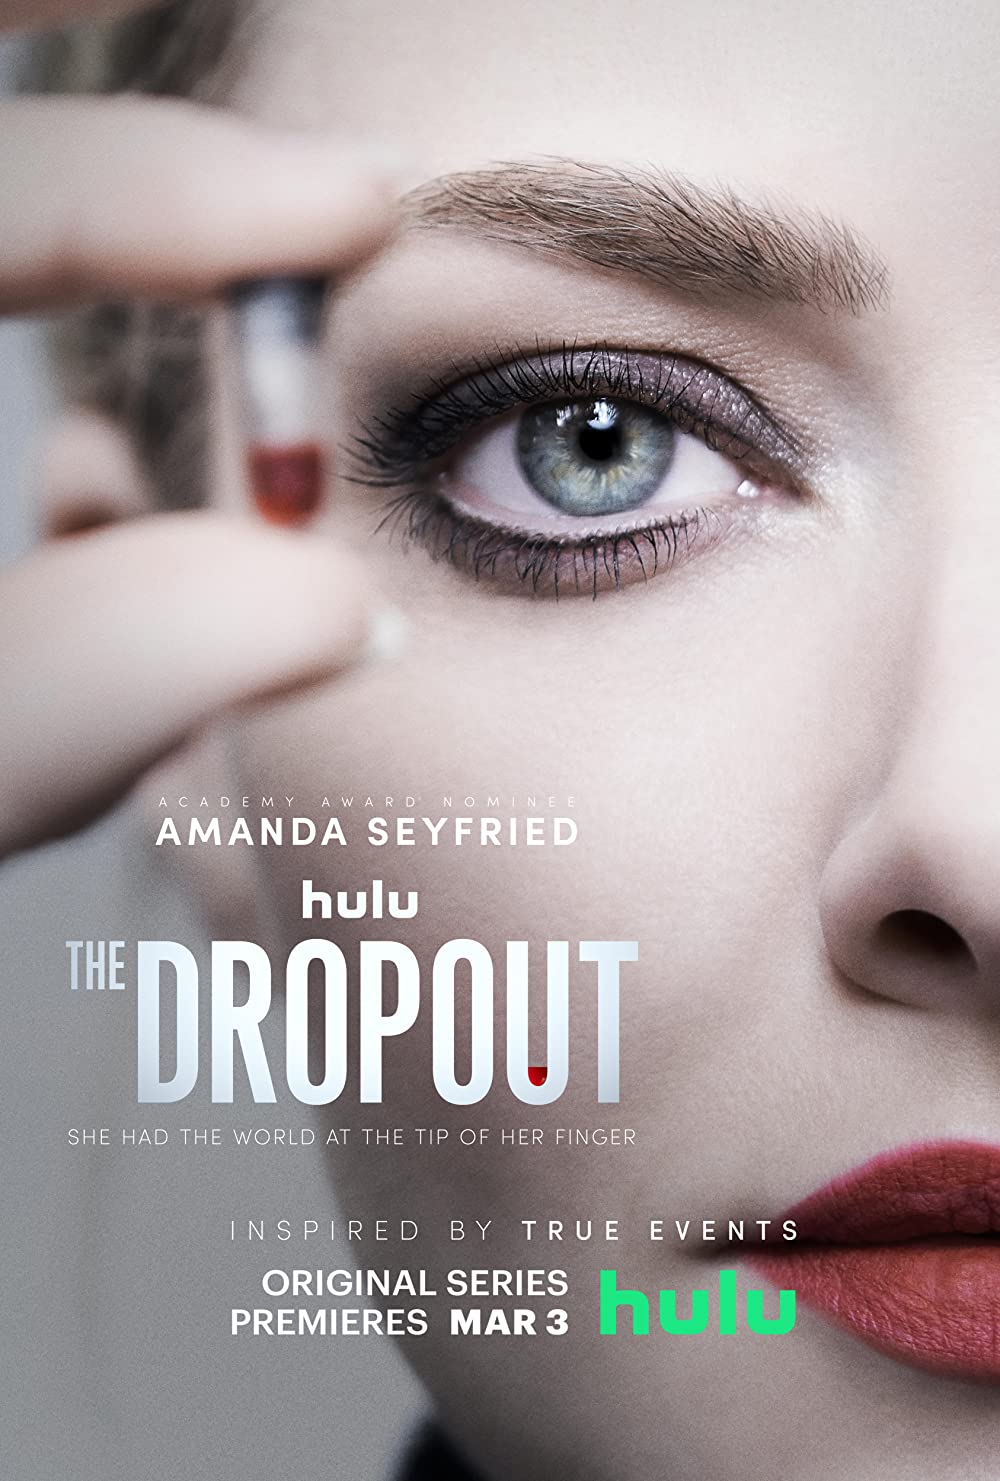 Amanda Seyfried signed The Dropout Poster Image (8x10, 11x17)